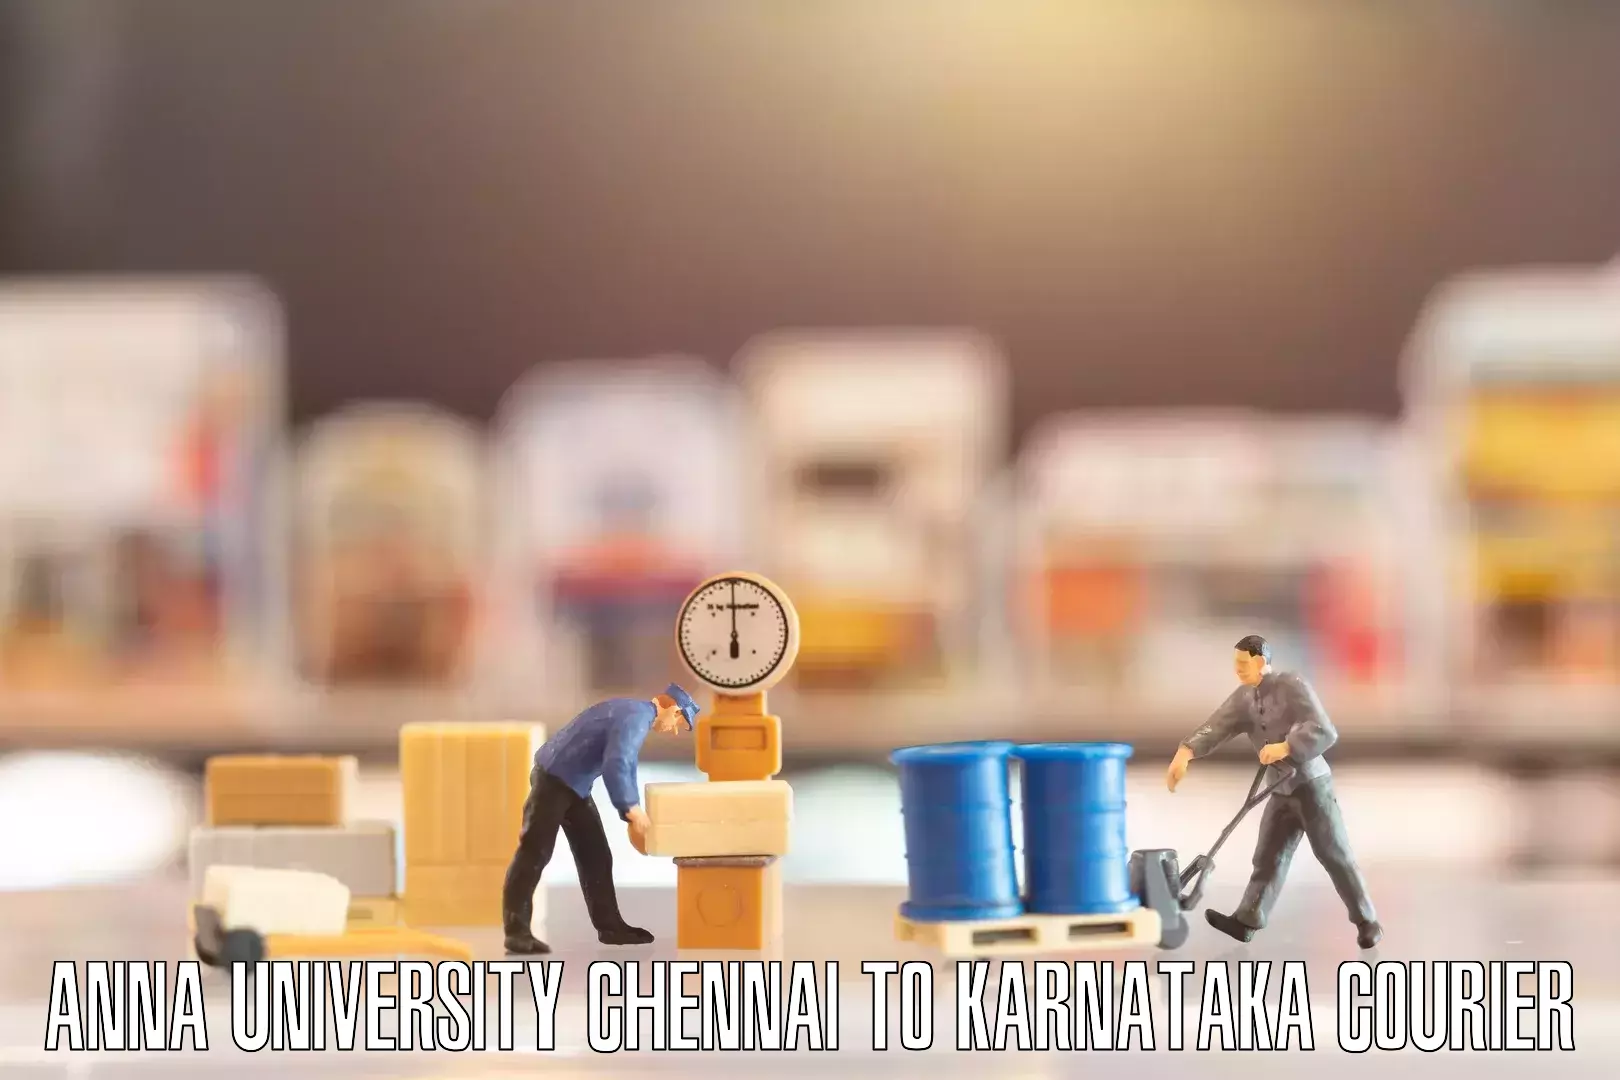 Home moving specialists Anna University Chennai to Shikaripur